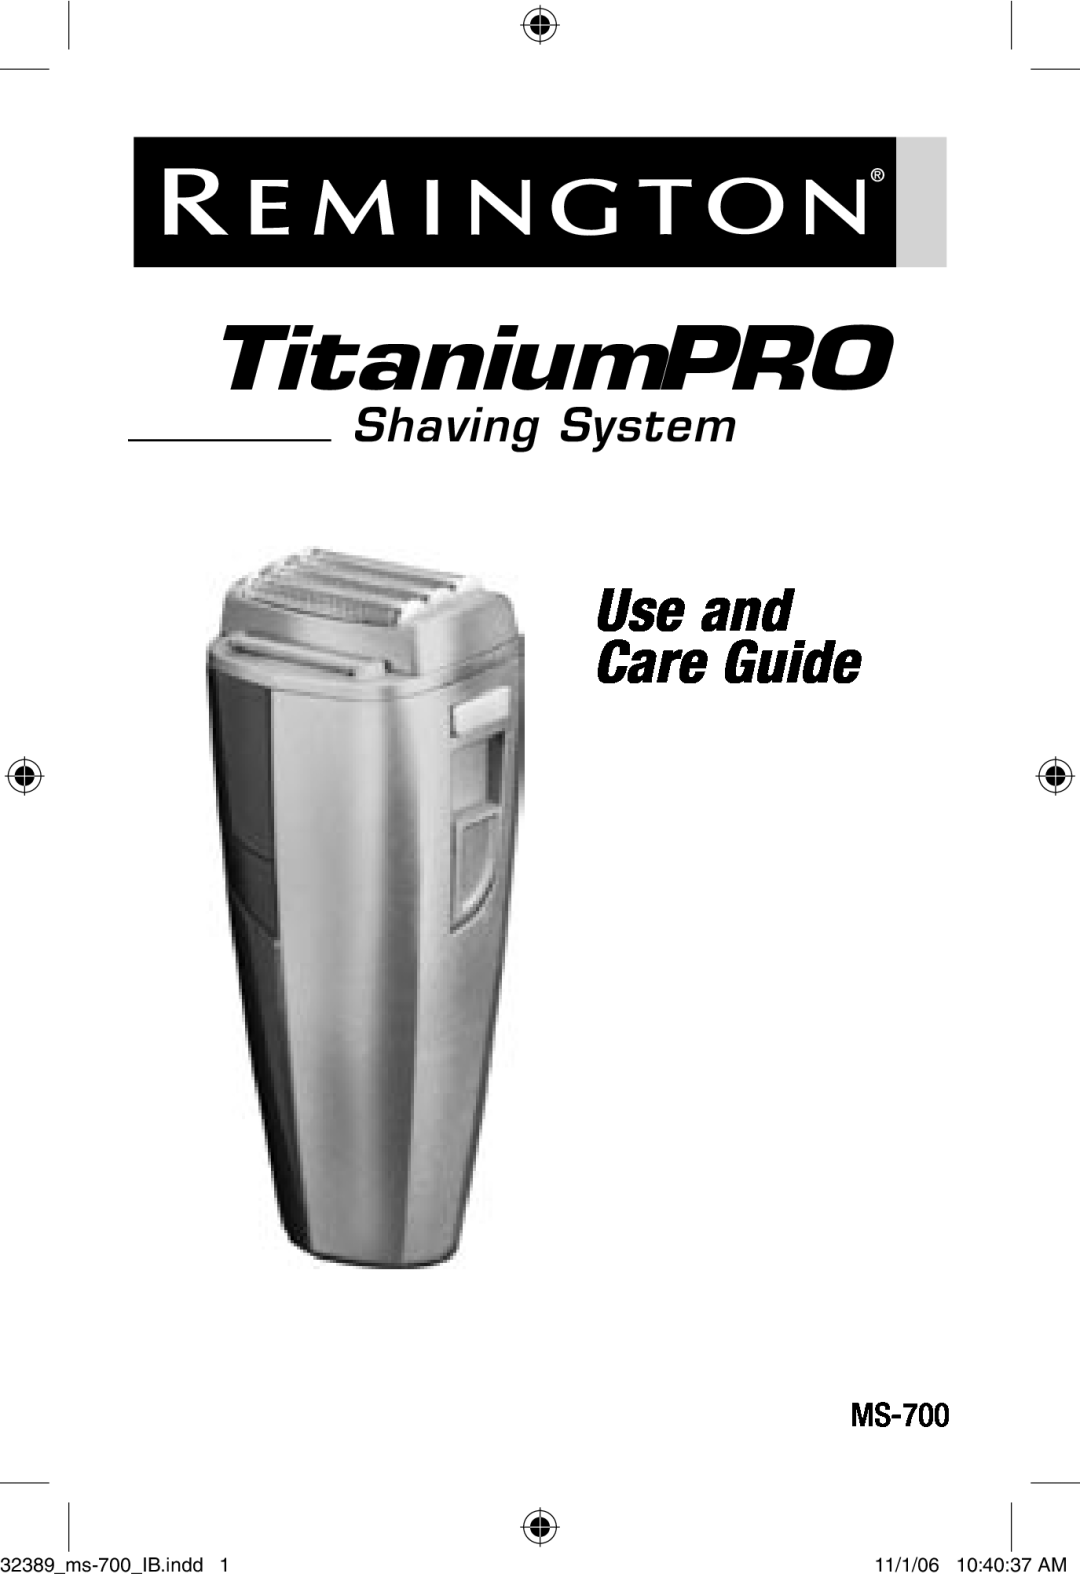 Remington MS-700 manual TitaniumPRO, Use and Care Guide, Shaving System 